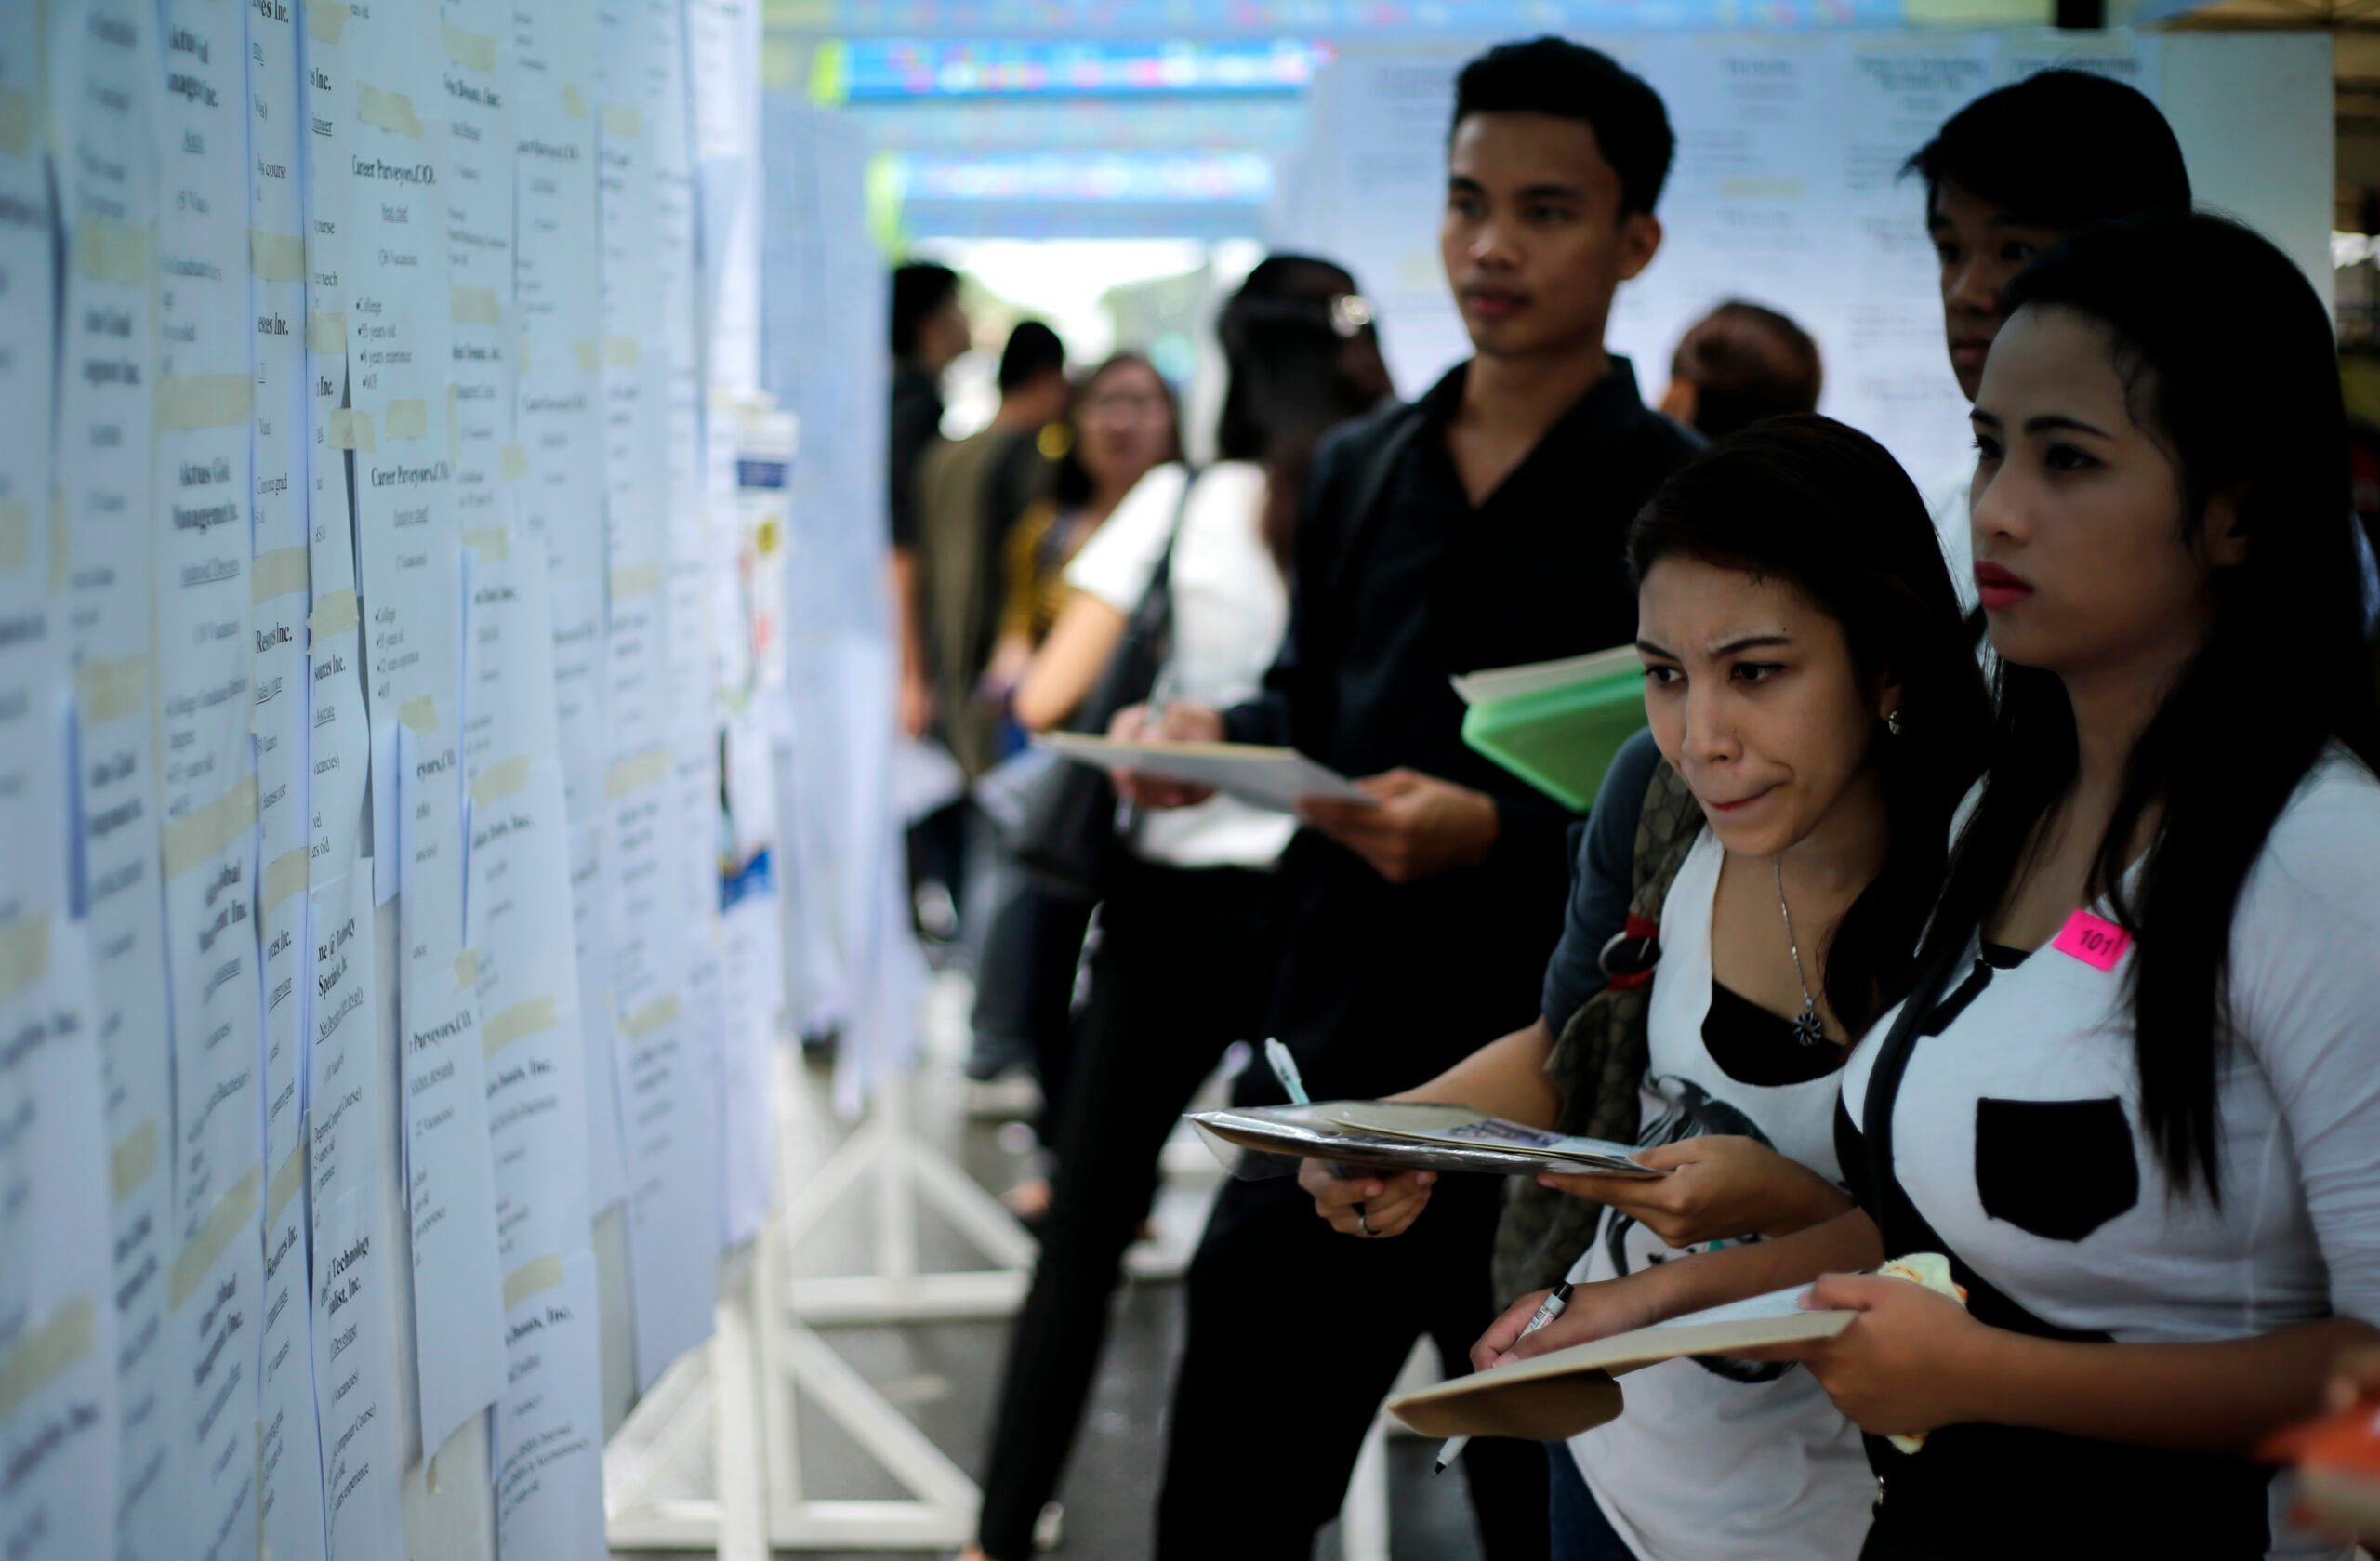 Adult joblessness rises to 23.2% – SWS